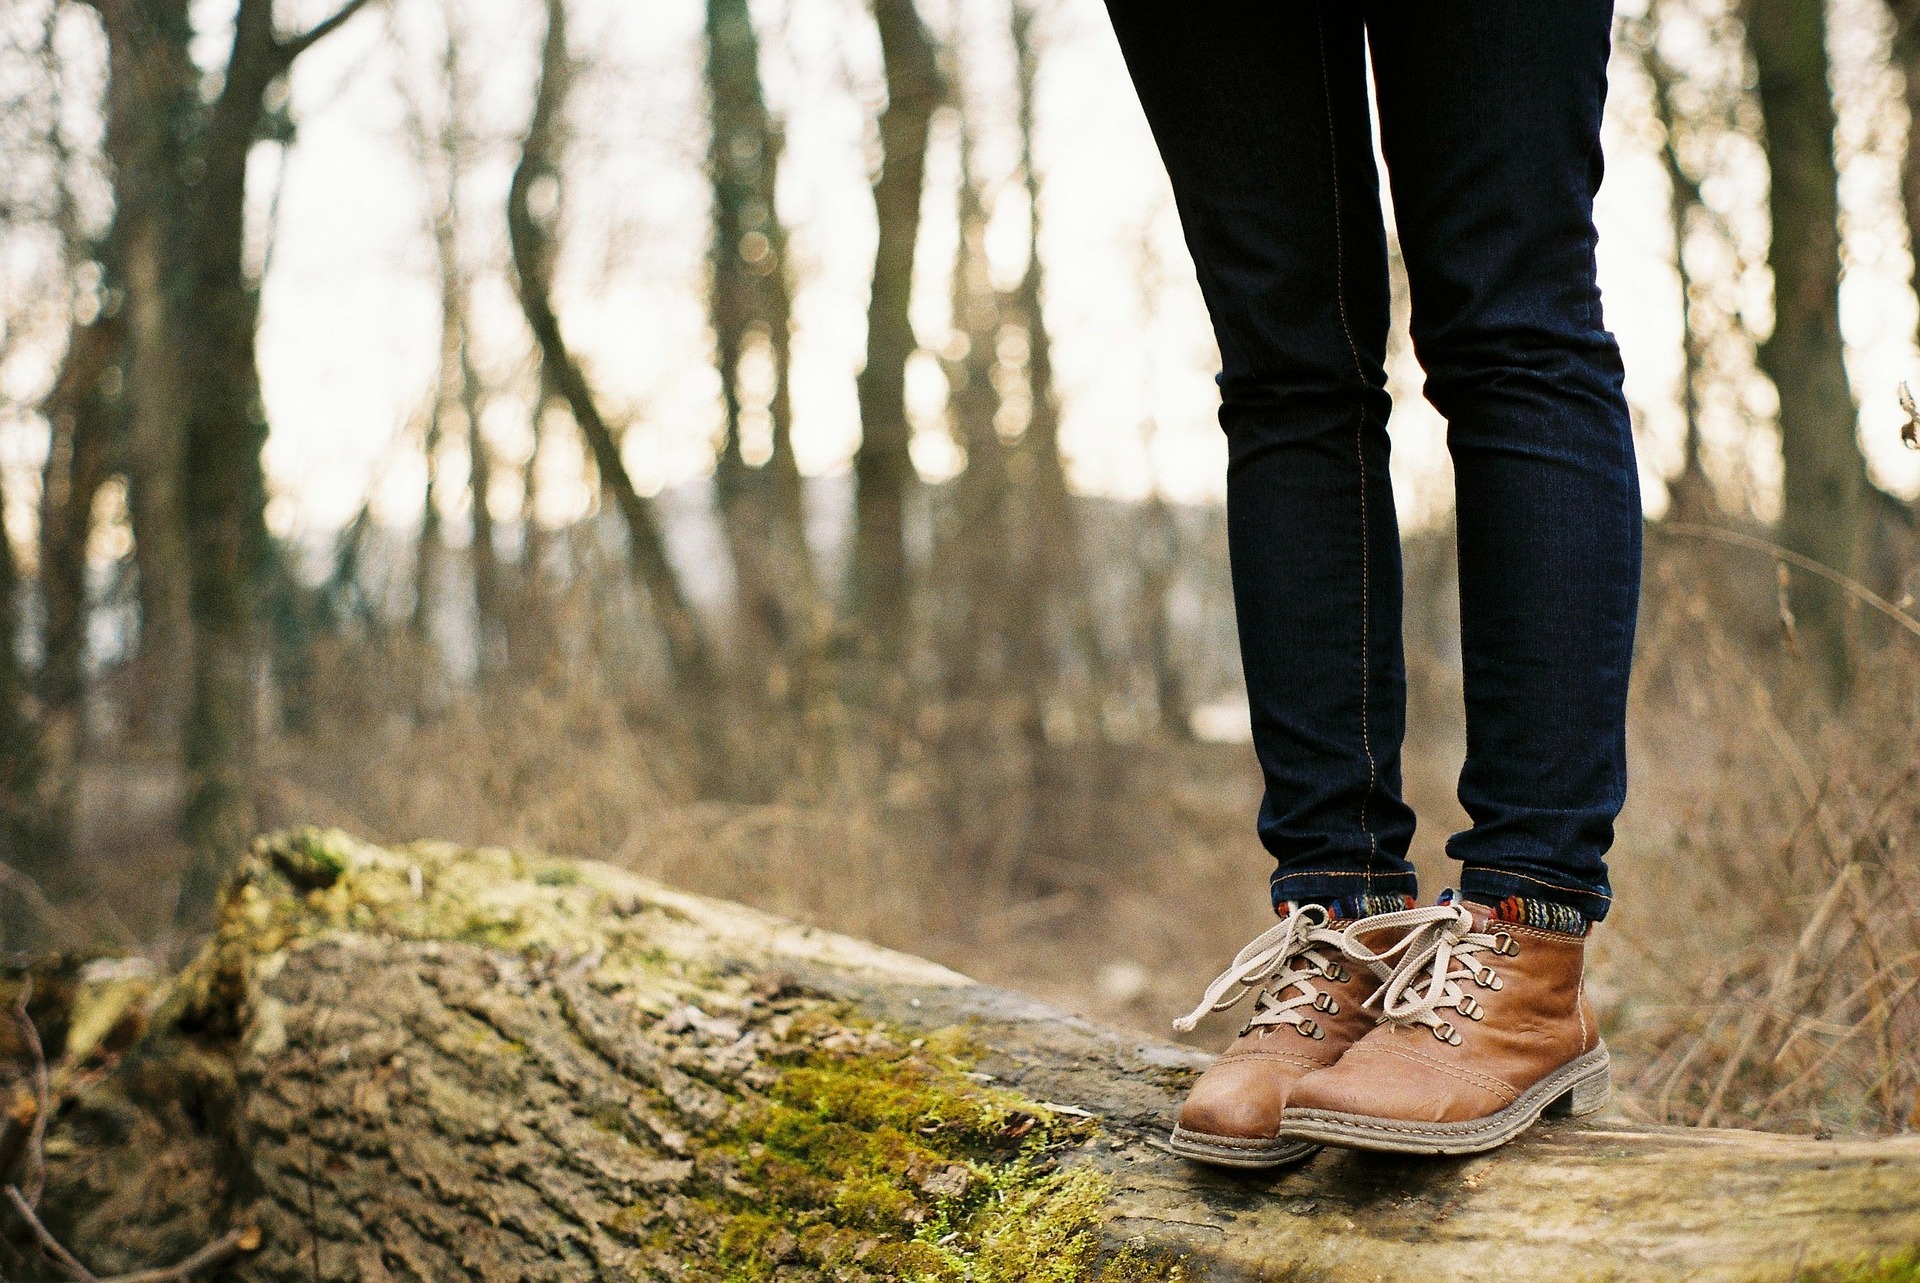 A person - shown from the waist down - stands on a fallen tree trunk covered in moss. They wear balck jeans and brown boots. In the background is a forest and undergrowth.